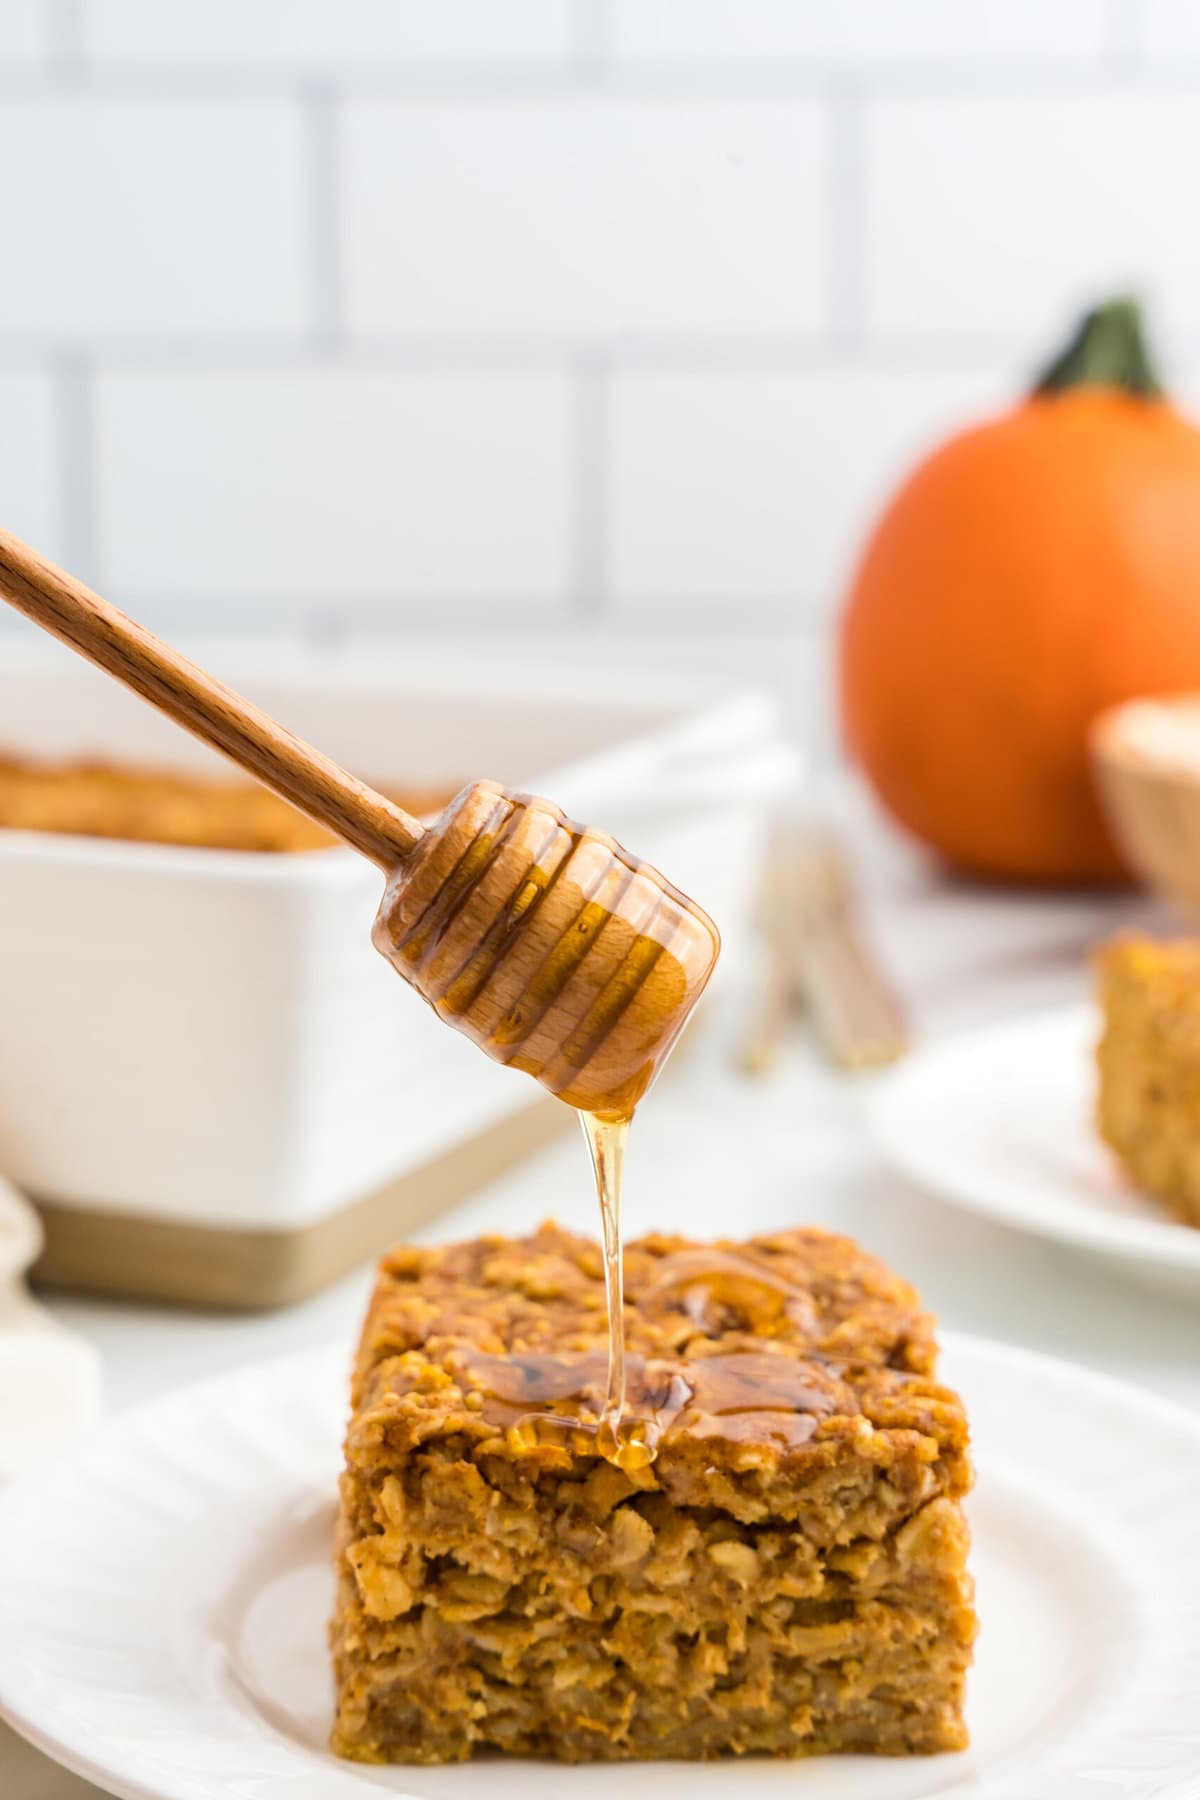 Pumpkin Baked Oatmeal square on plate being drizzled with honey